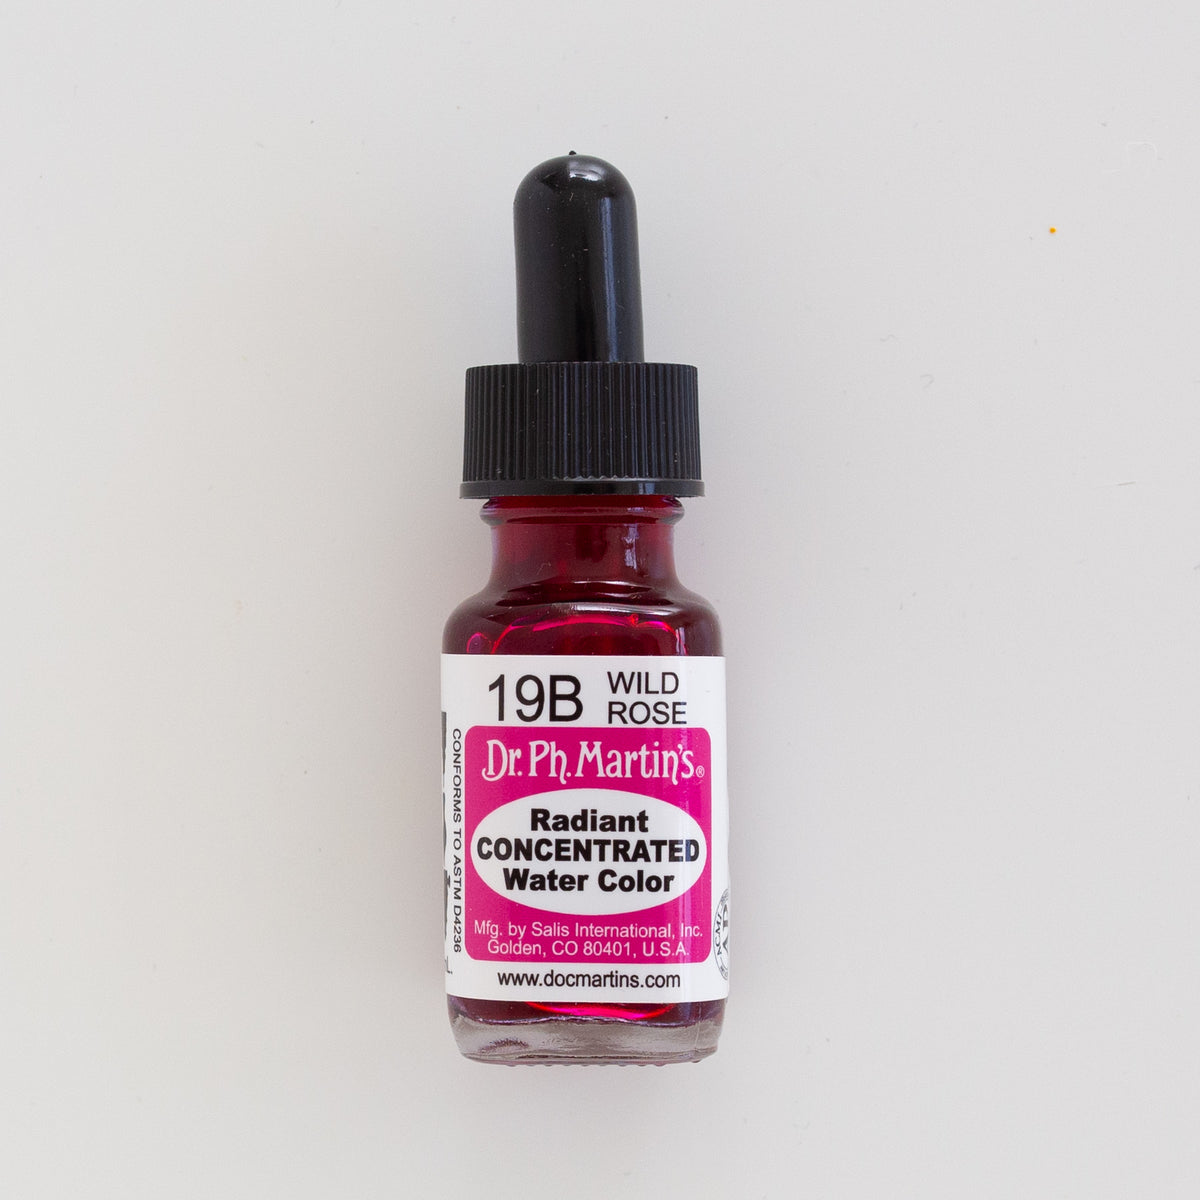 Dr. Ph. Martin’s Radiant Concentrated 19B Wild Rose